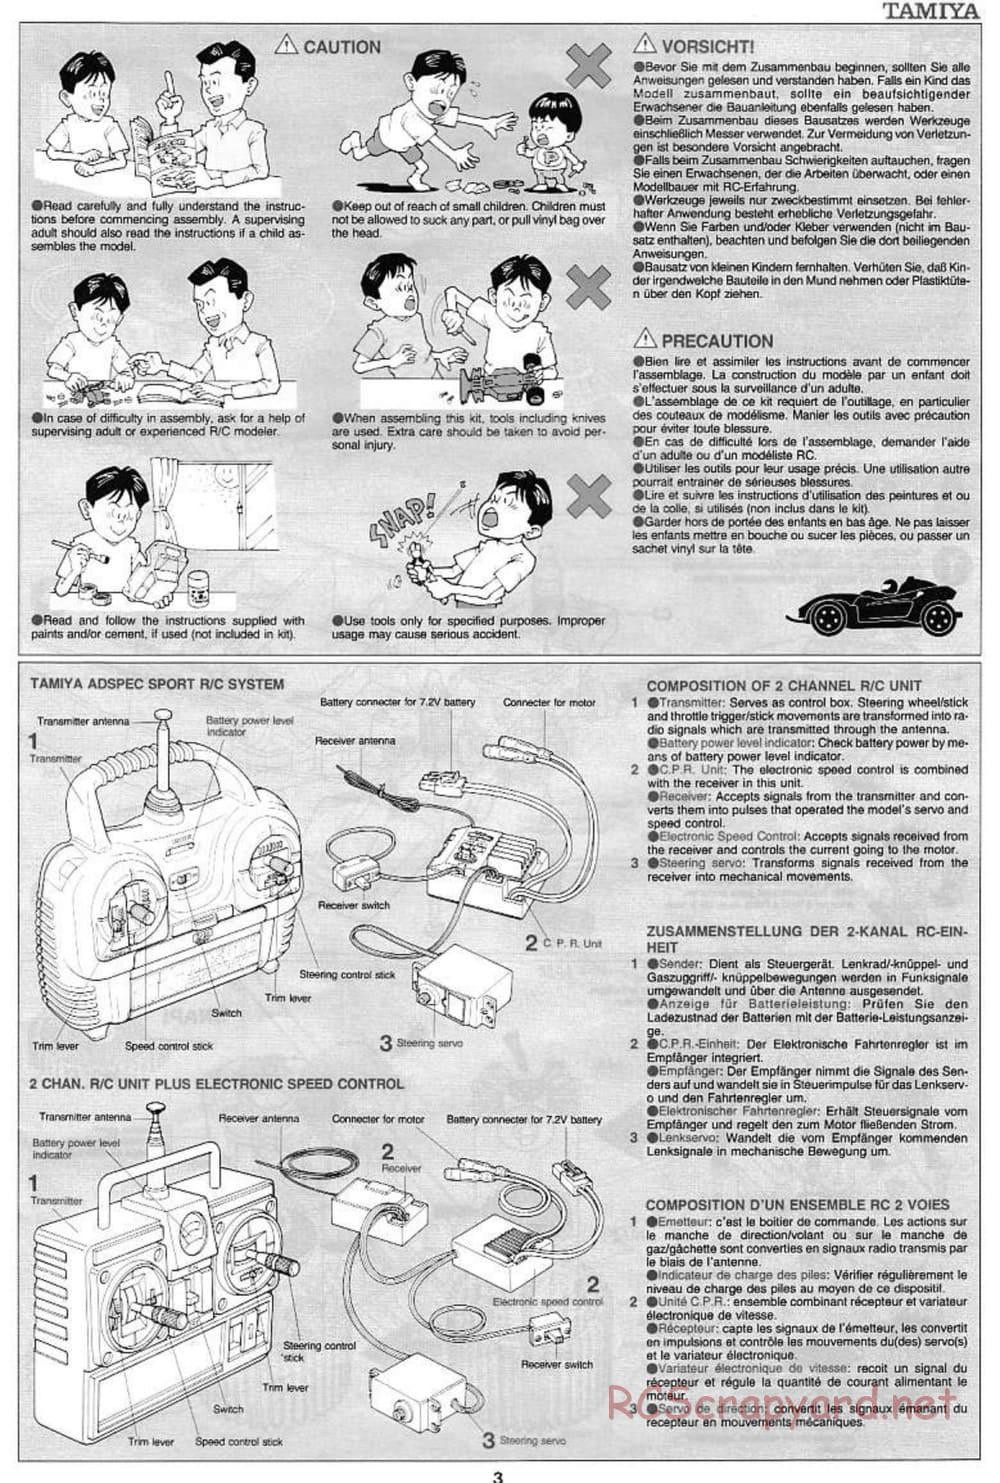 Tamiya - Voltec Fighter - Boy's 4WD Chassis - Manual - Page 3